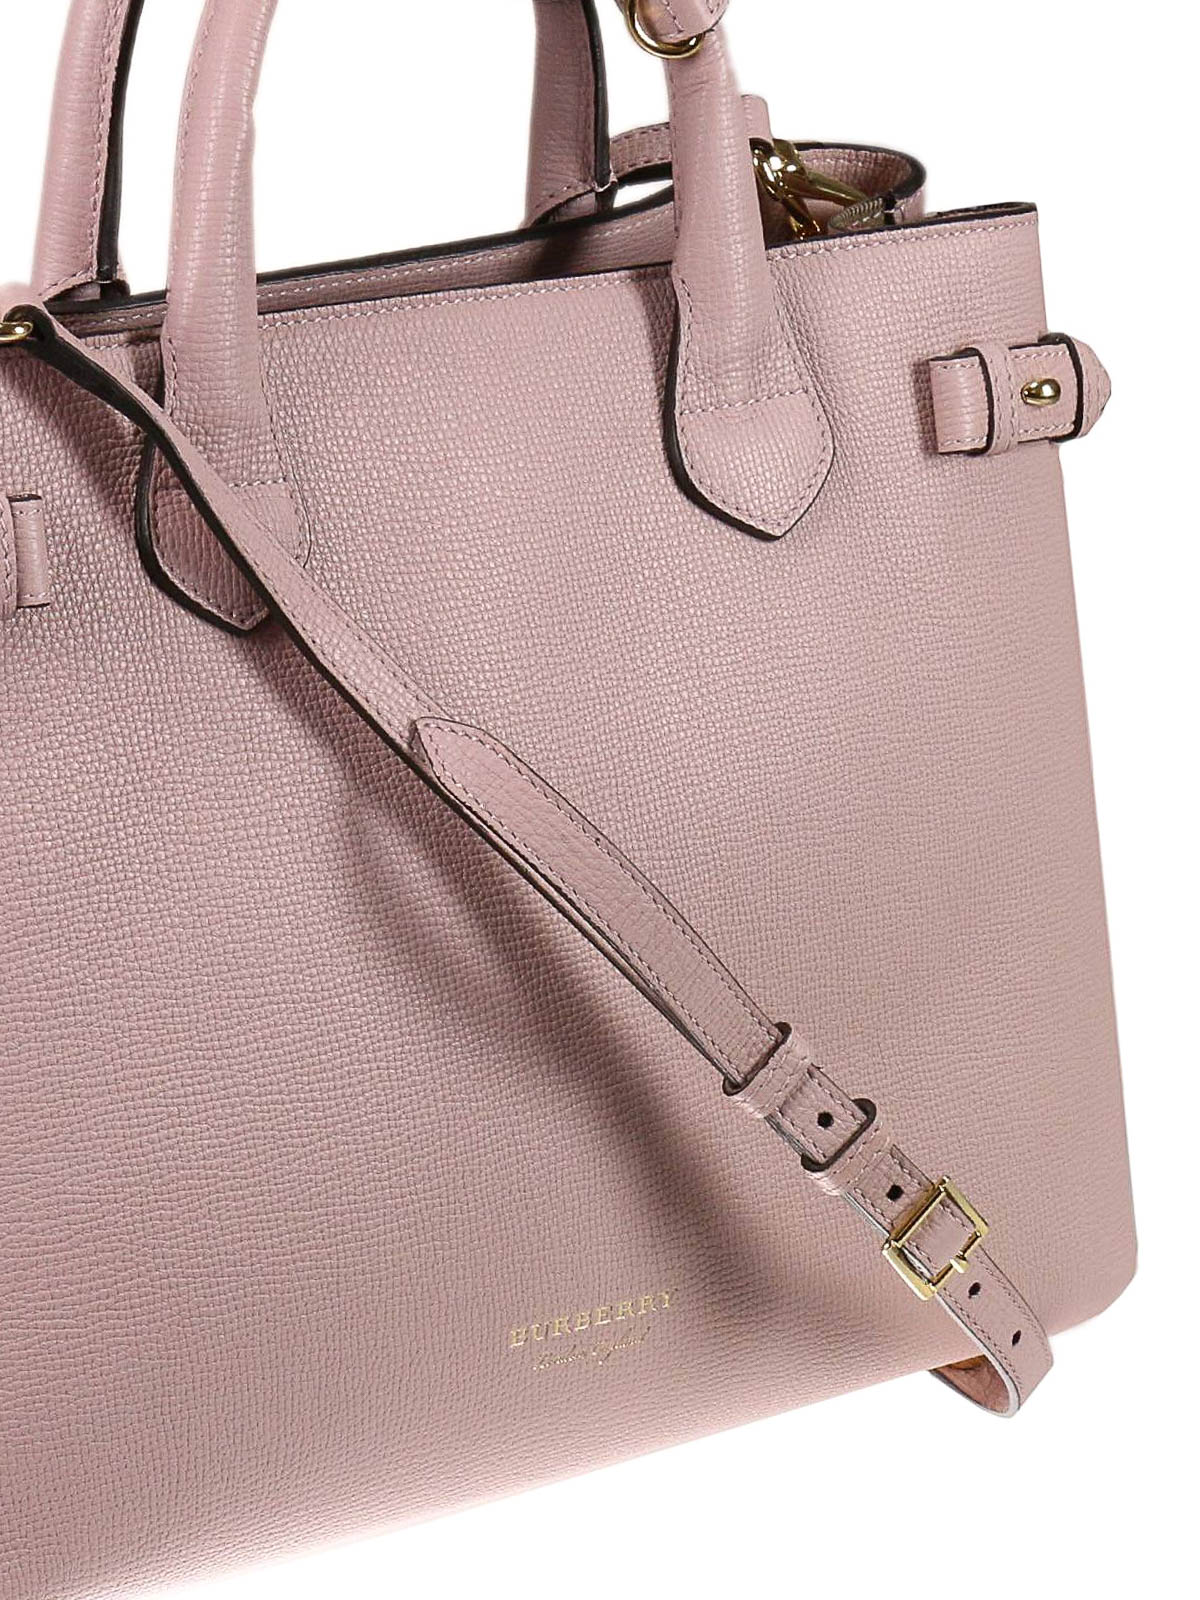 Totes bags Burberry - The Banner medium leather bag - 4023697